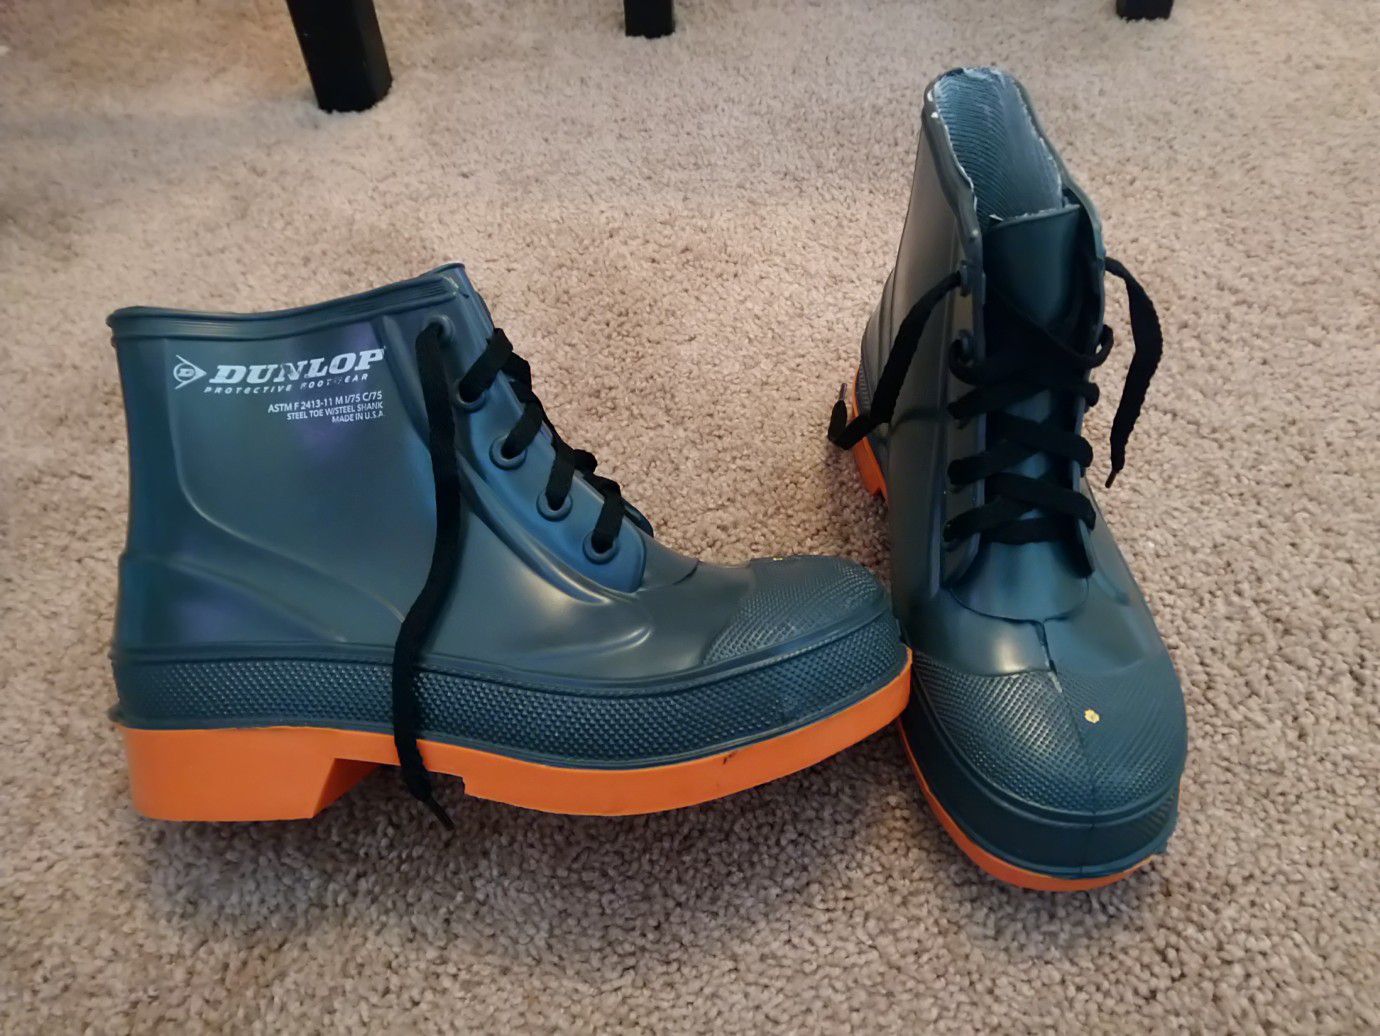 Dunlop rubber safety boots size 7 $25 OBO